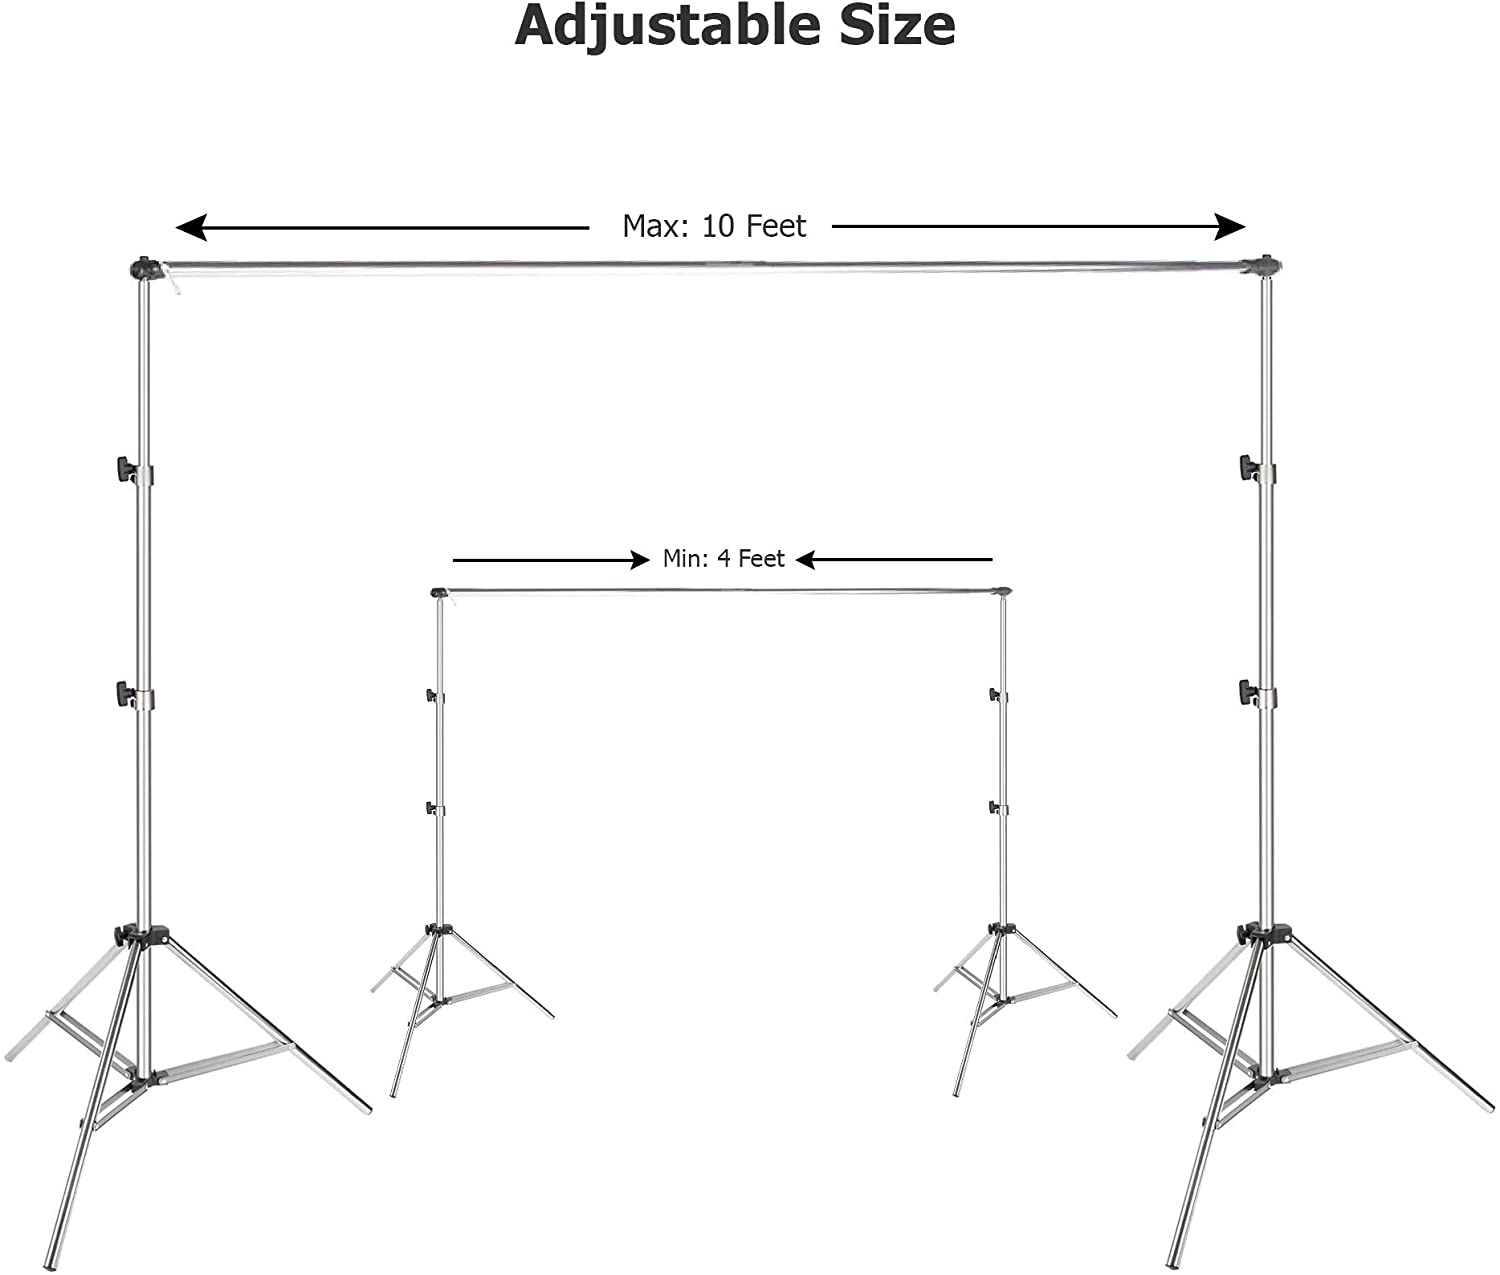 Coopic 2X3m Heavy Metal Steel Photo Video Studio Background Stands Adjustable Photography Video Muslin Backdrop Support With 2 Clamps